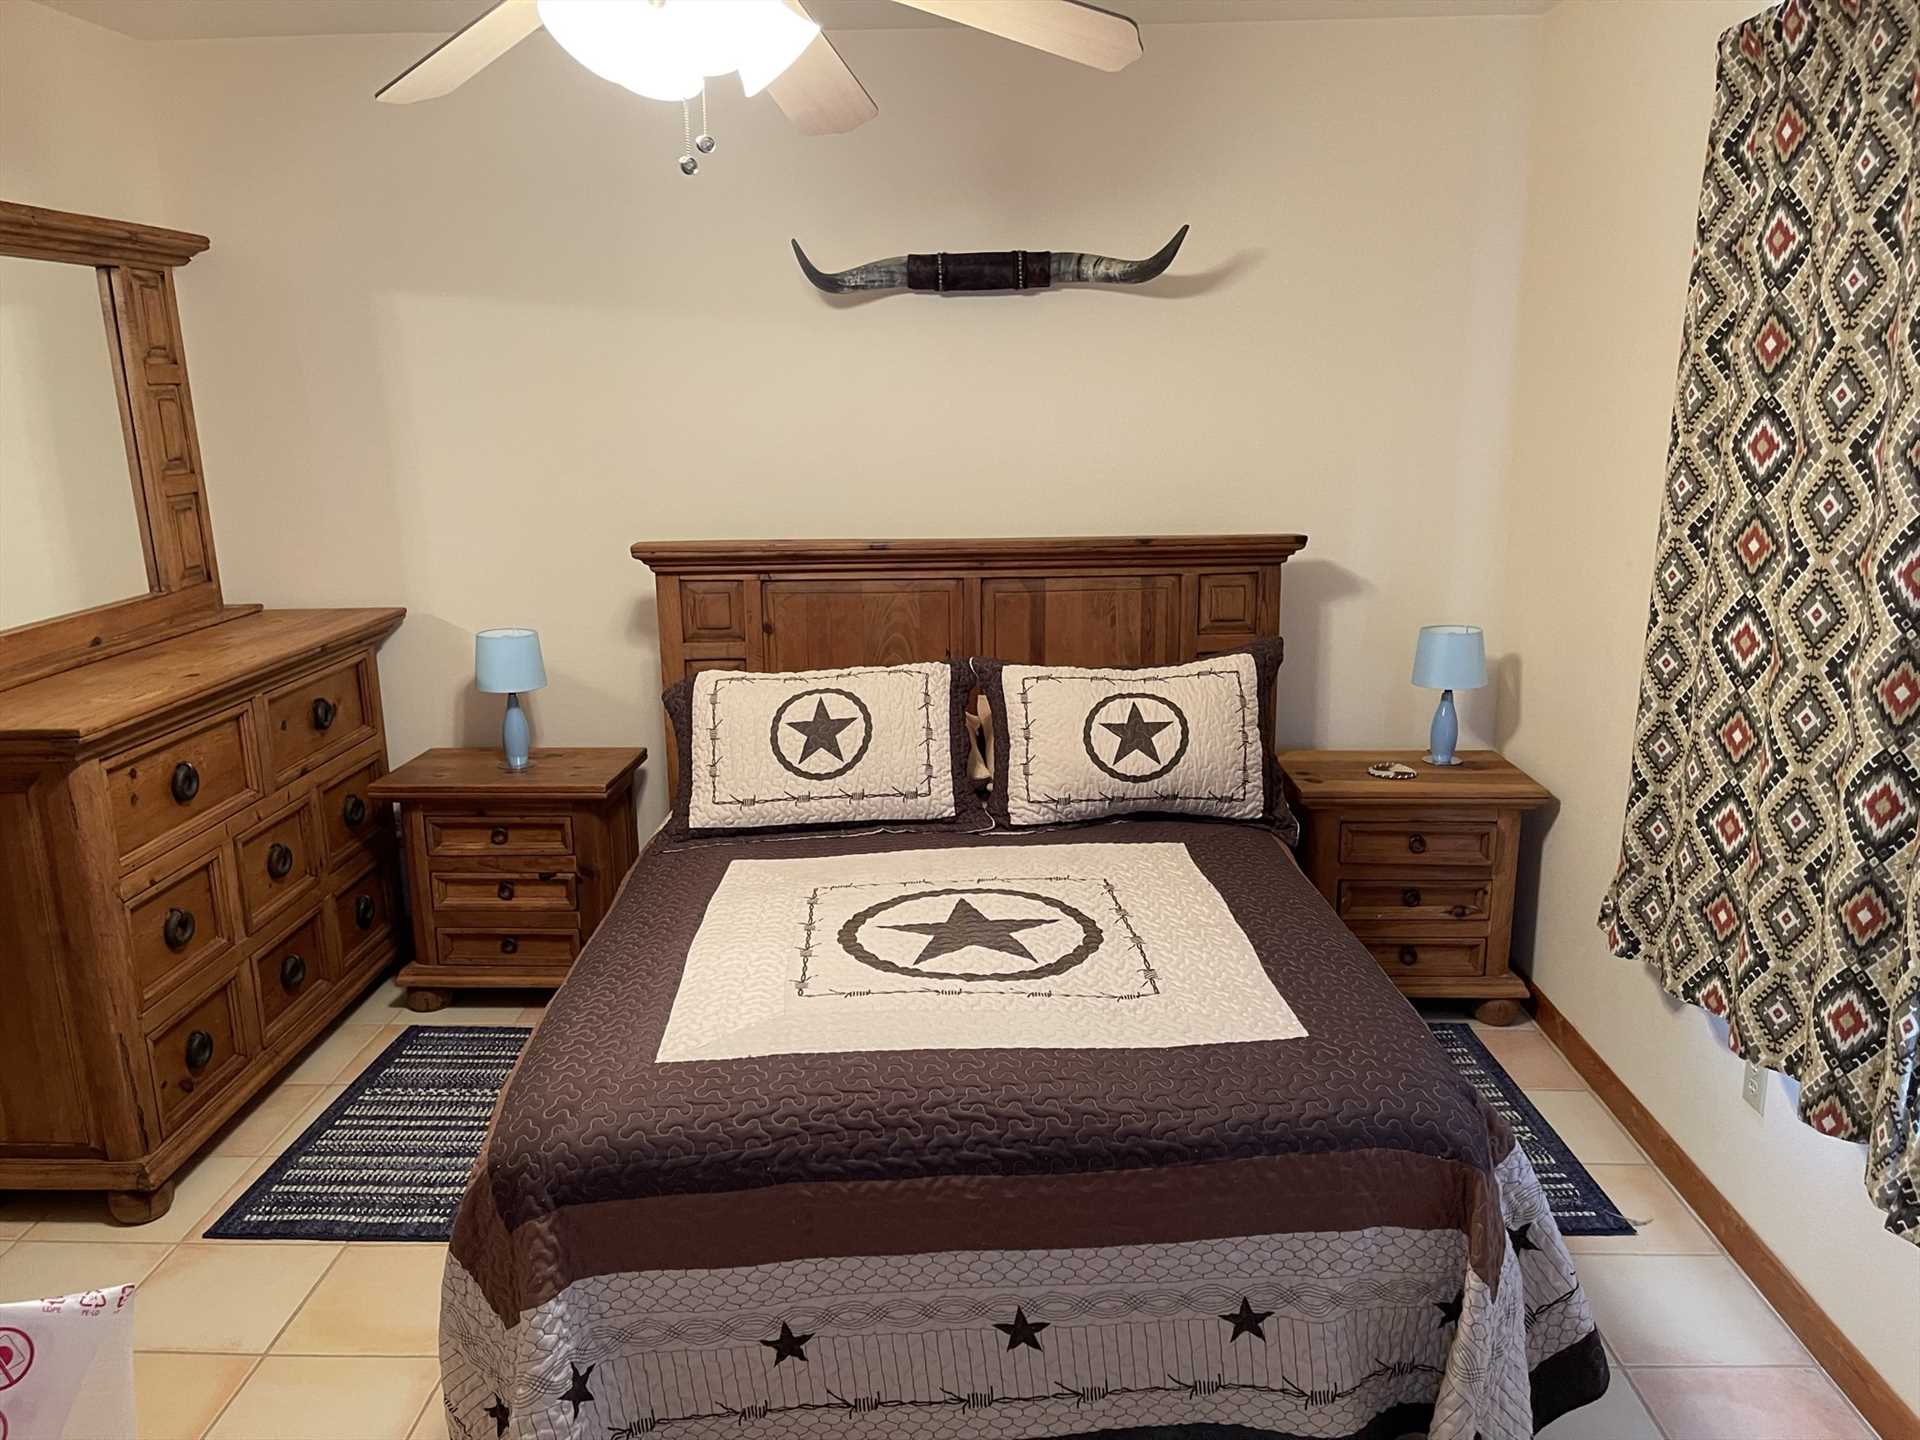                                                 Fresh and warm Lone Star linens cover the luxuriously comfortable queen-sized bed in the second bedroom!